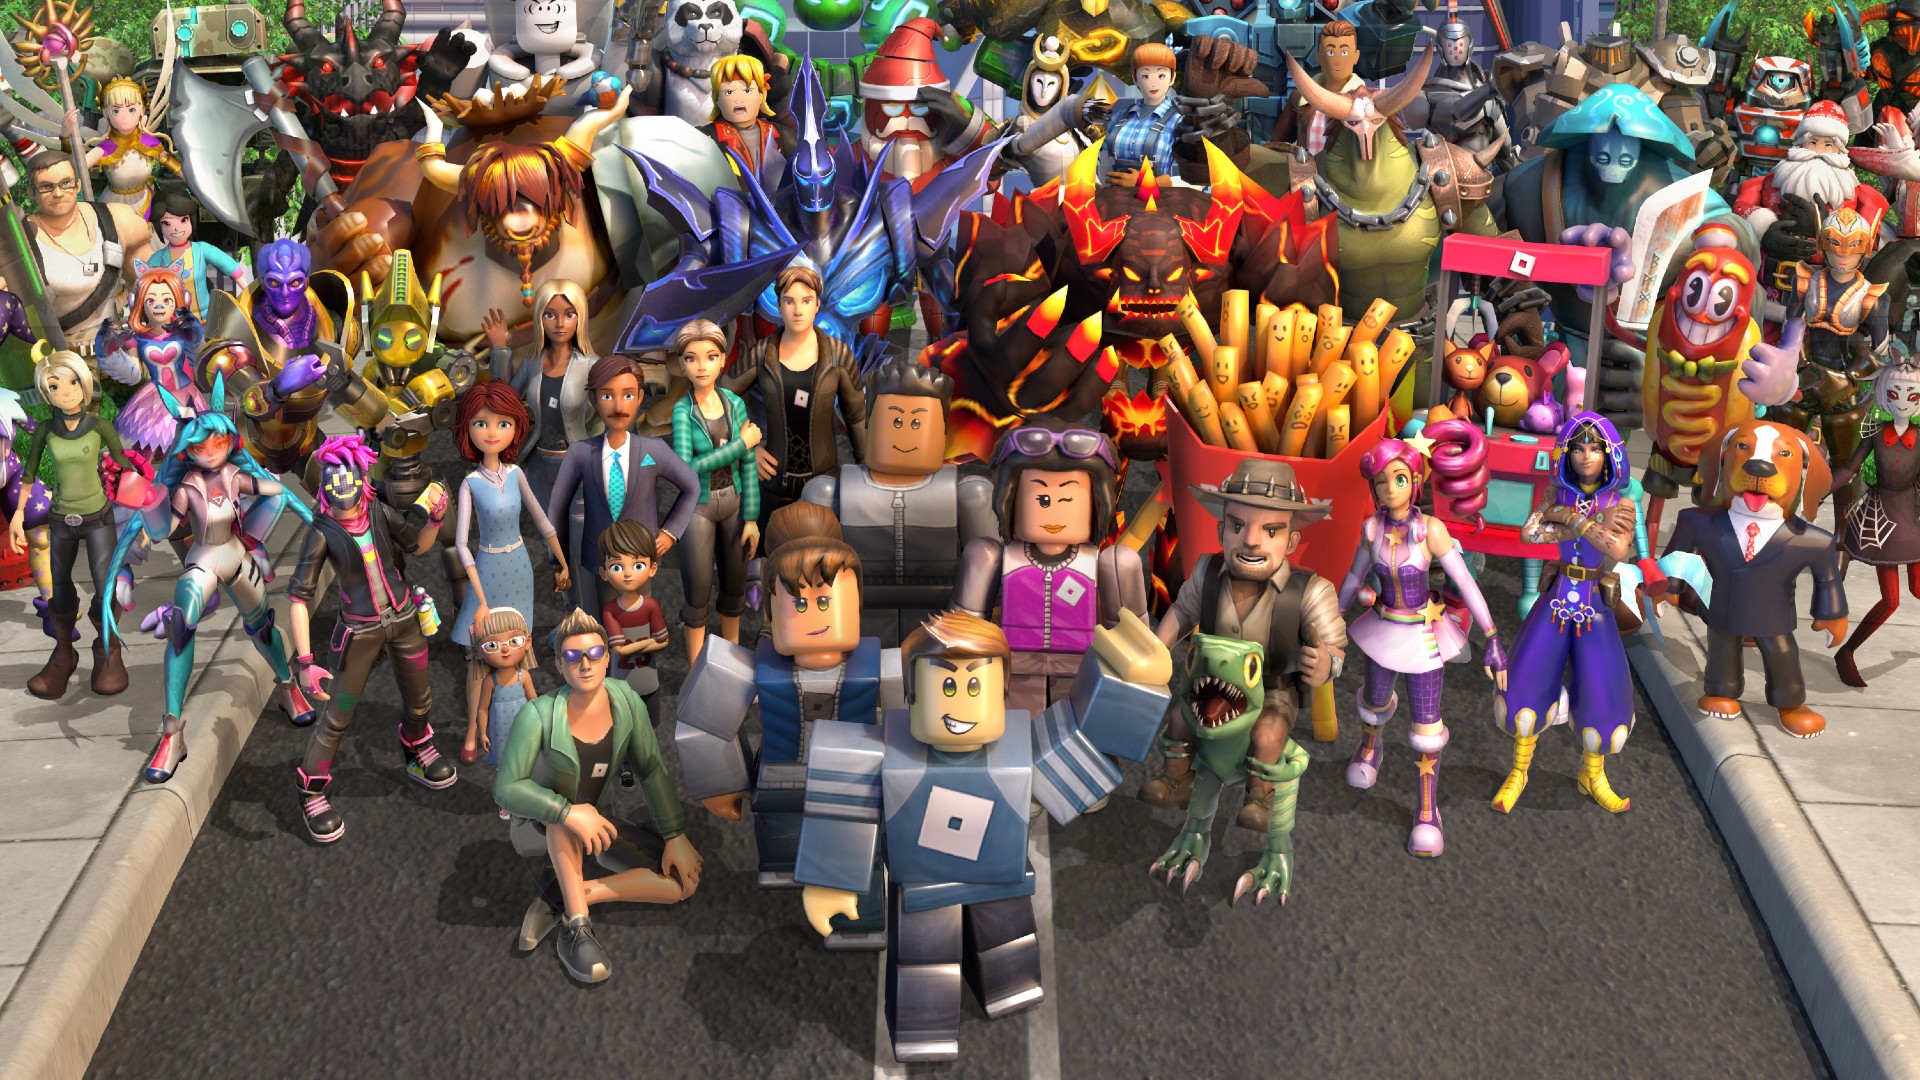 Roblox promo codes list March 2022 – how to redeem